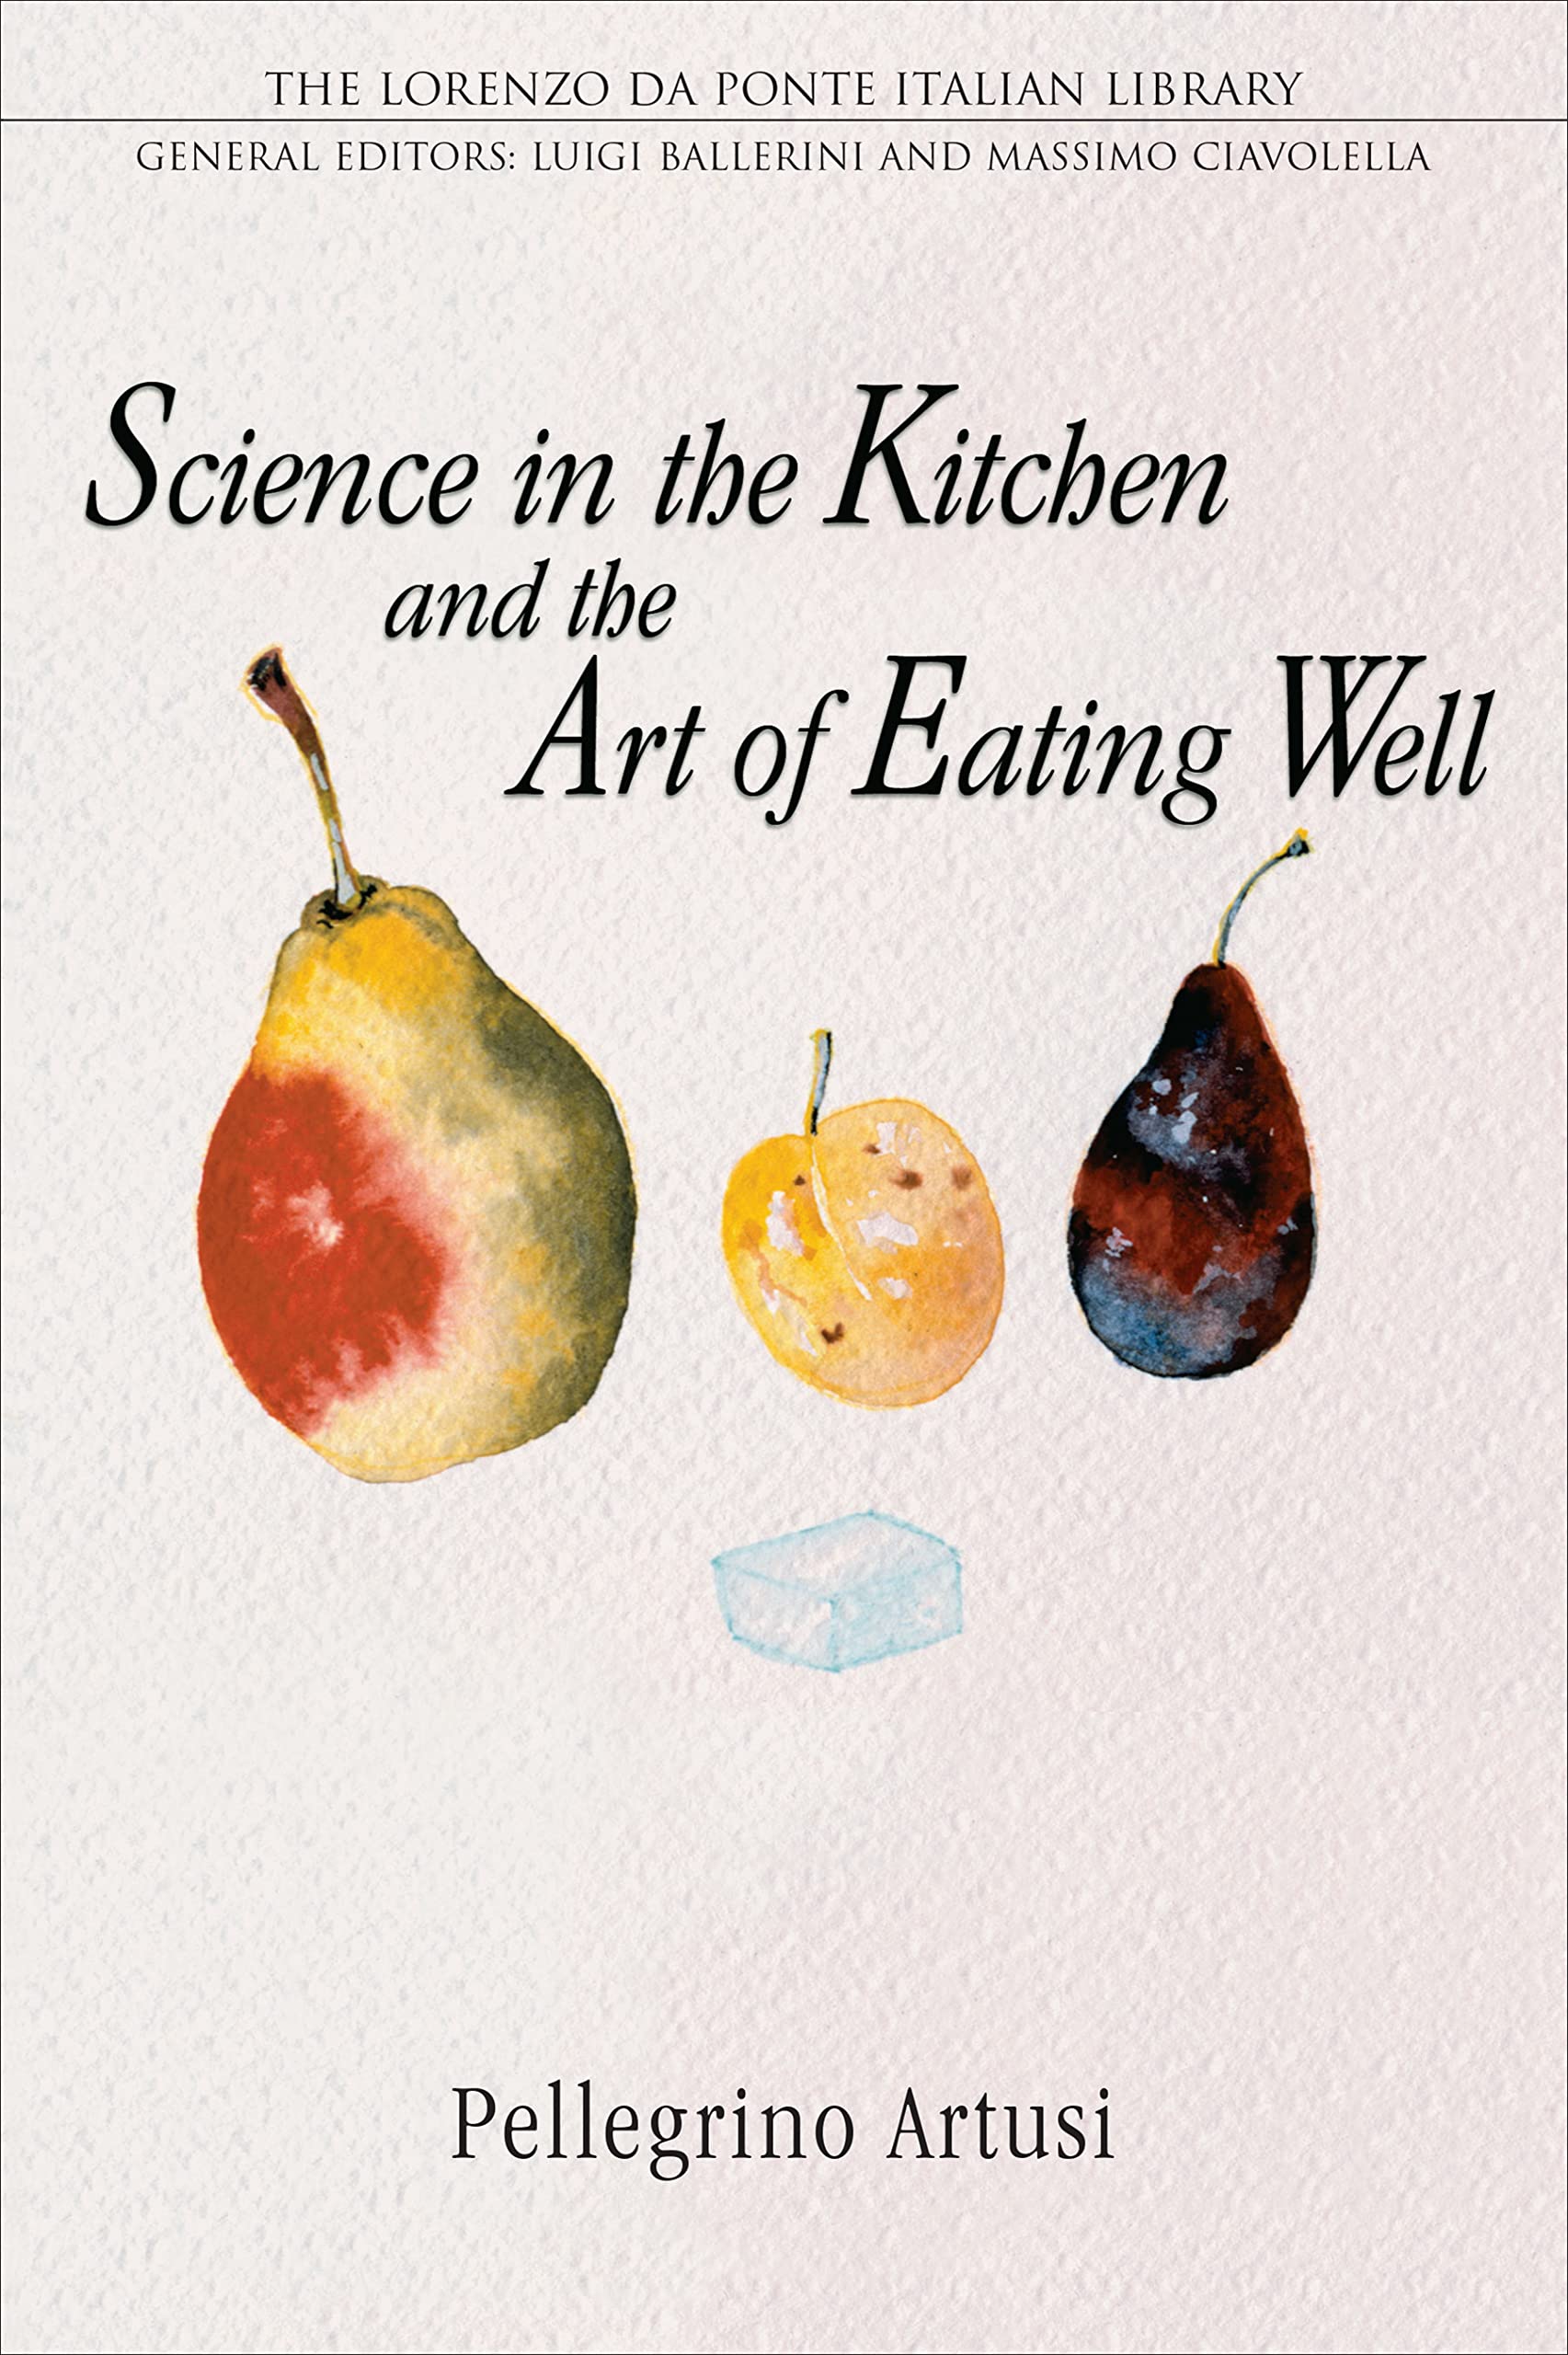 Science in the Kitchen and the Art of Eating Well (Pellegrino Artusi)